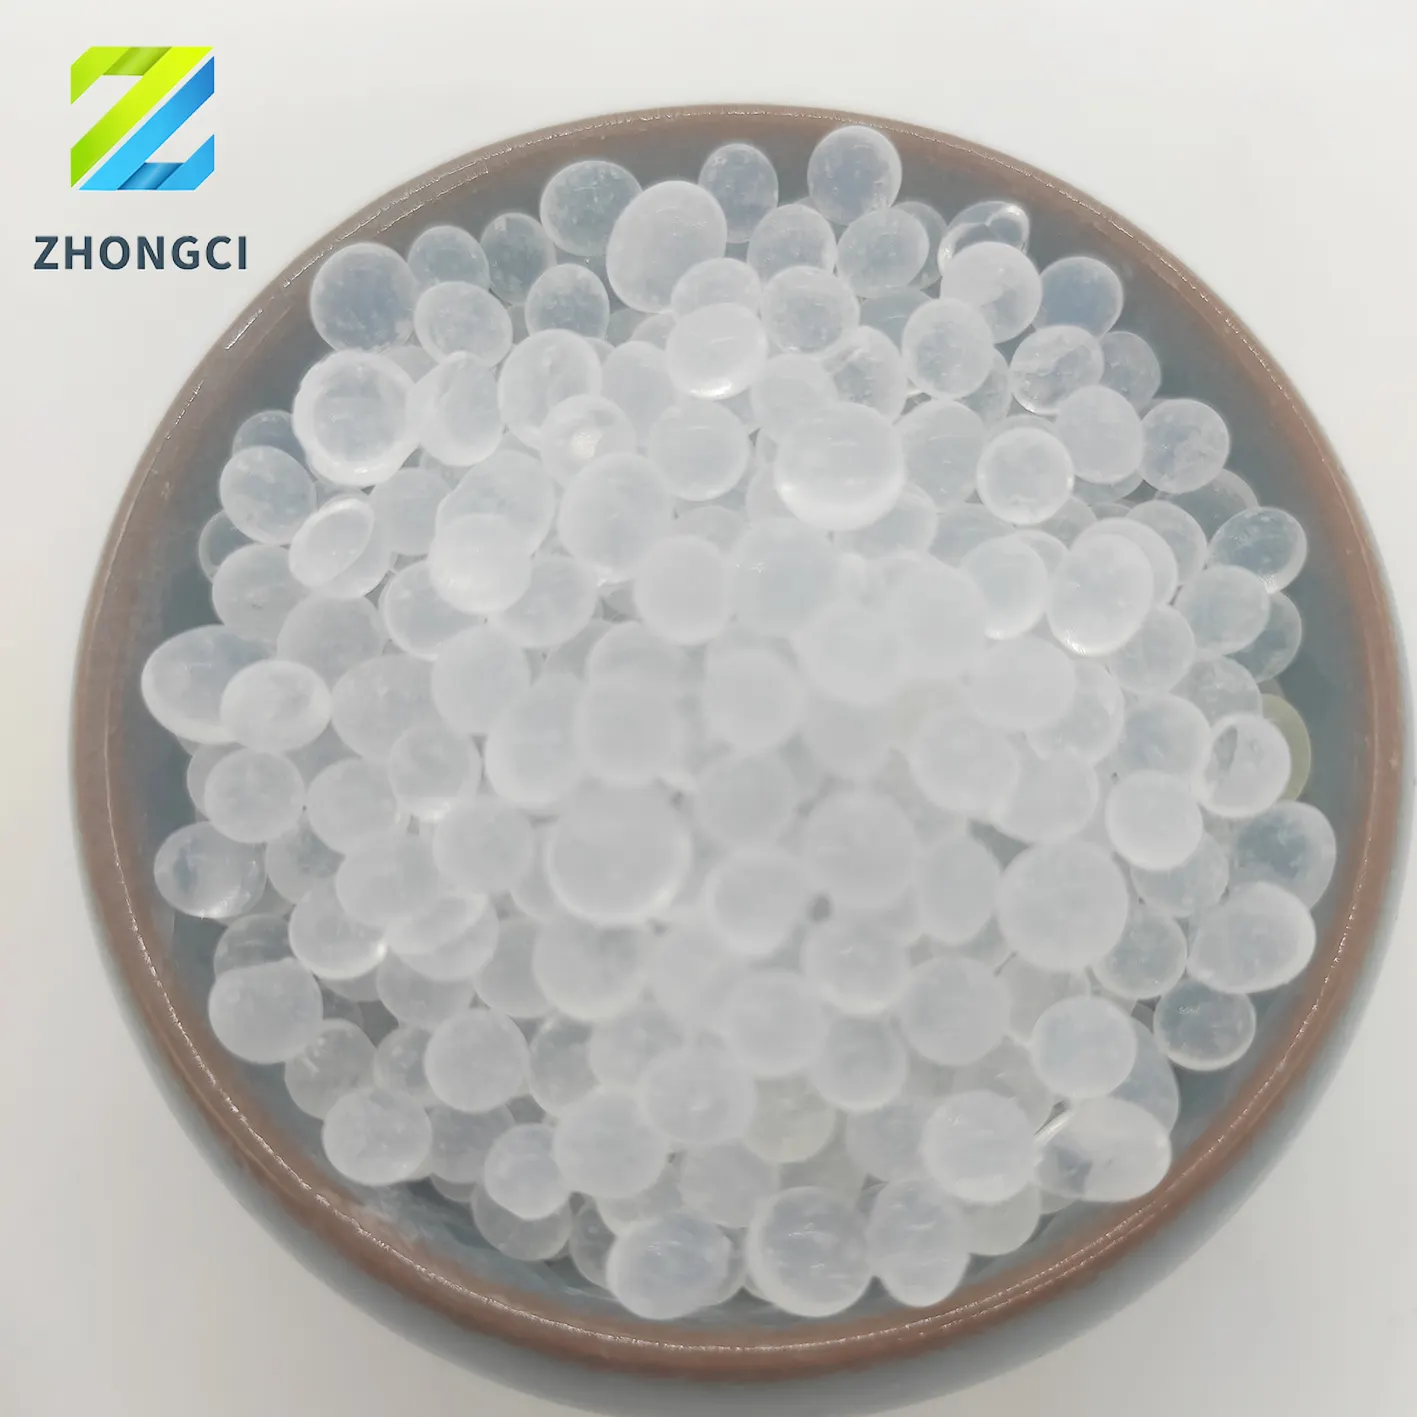 Zhongci Manufacturer Chemical Industrial Usage Compound Structure High Density Silica Gel Chromatography Chemical Formula